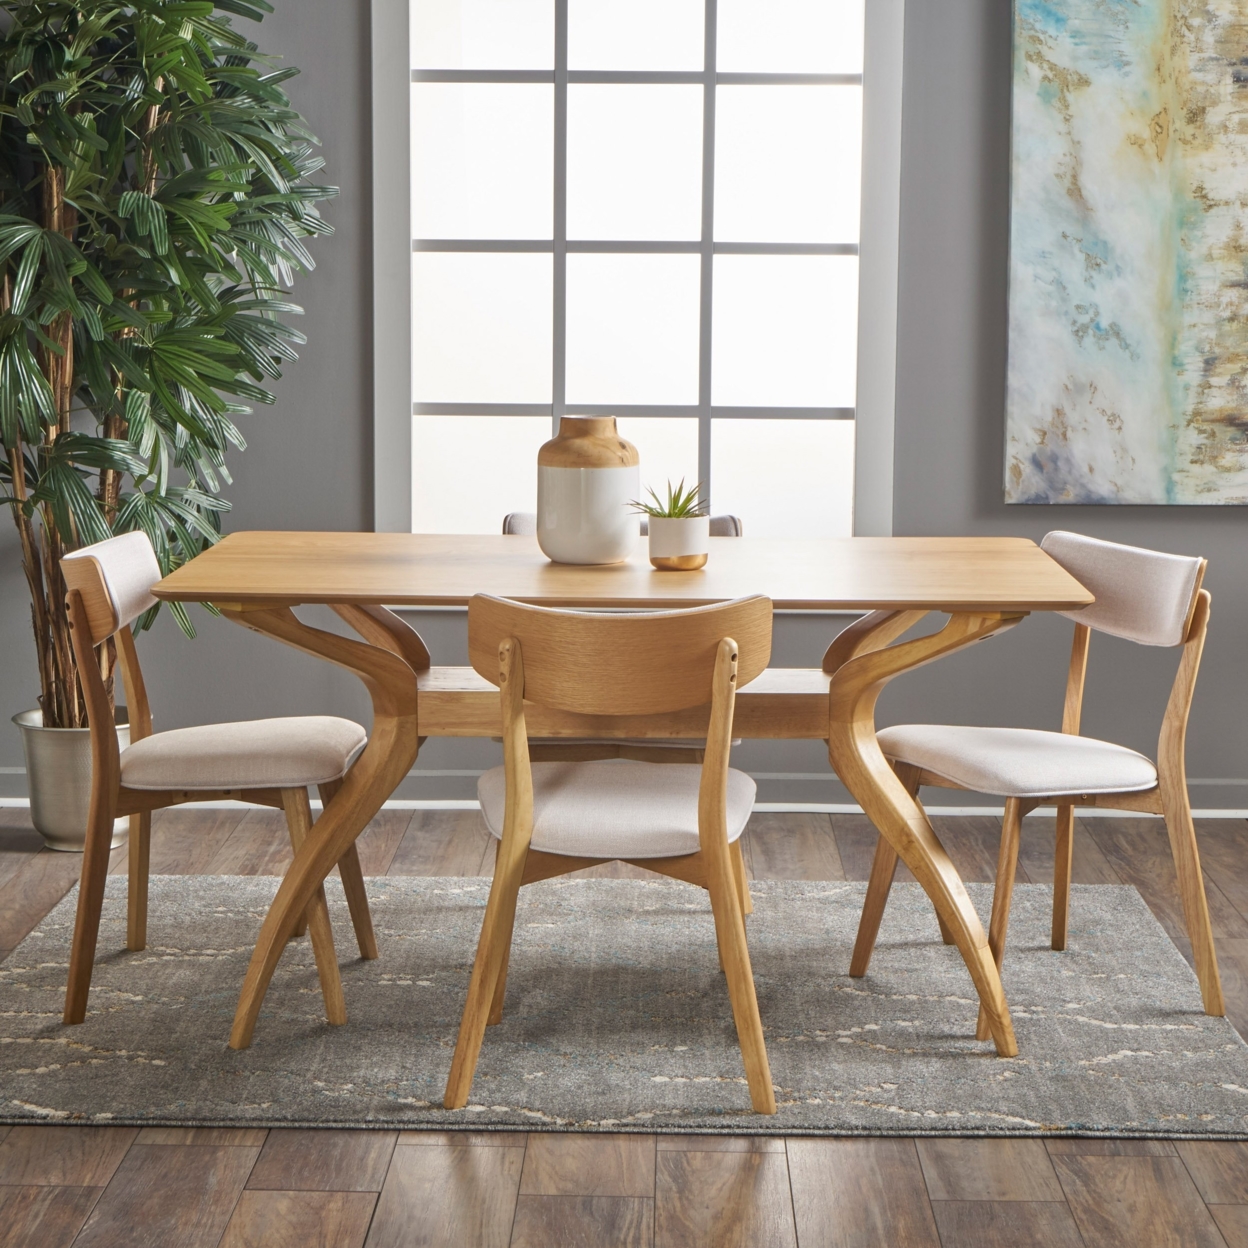 Nasseen Mid Century Finished 5 Piece Wood Dining Set With Fabric Chairs - Light Beige